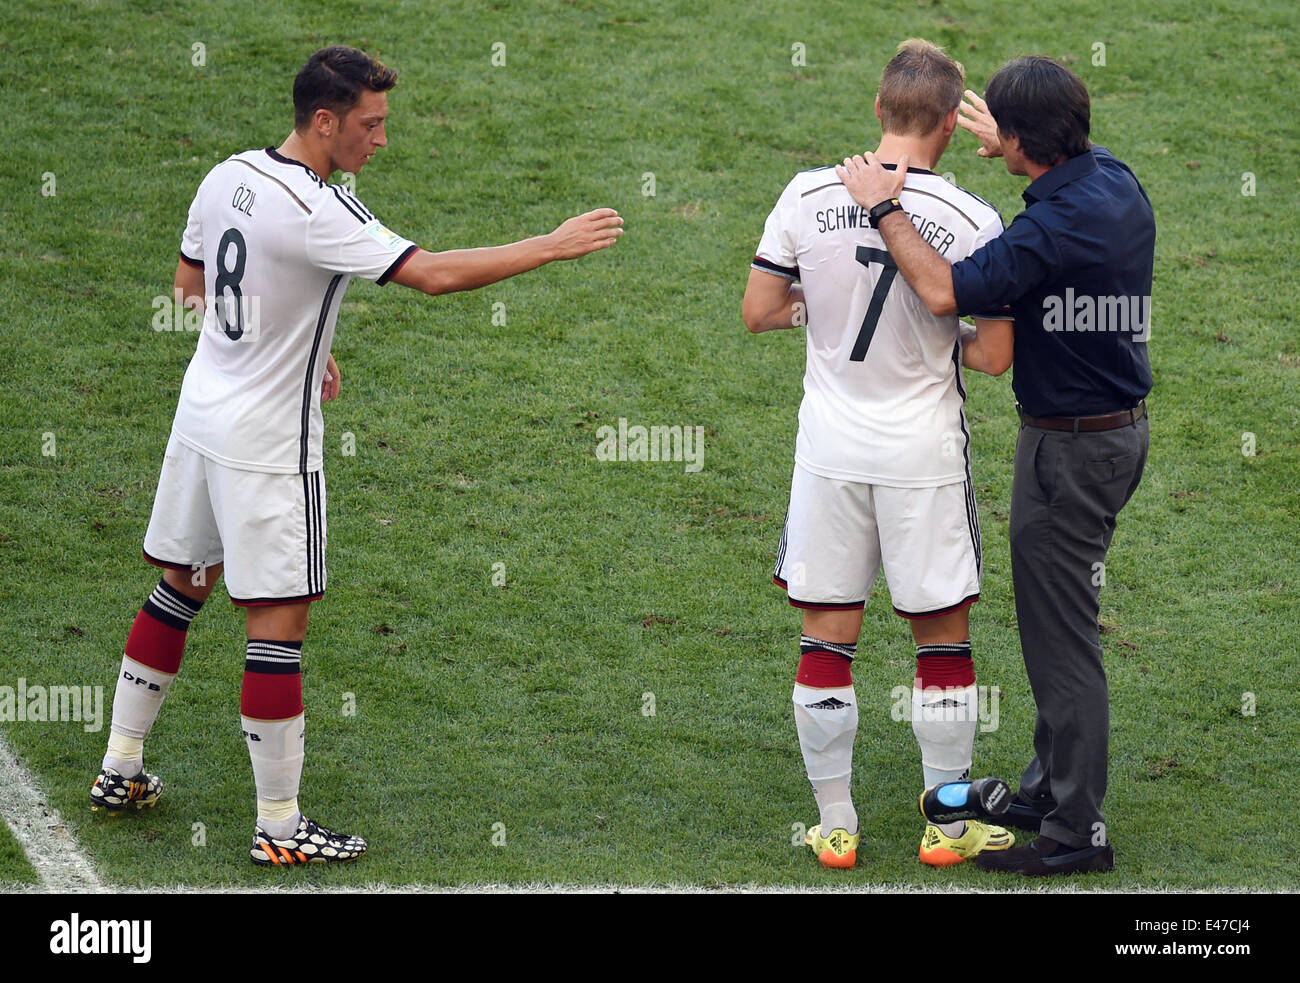 Rio de Janeiro, Brazil. 04th July, 2014. Head coach Joachim Loew (R) of Germany talks to Bastian Schweinsteiger (C) and Mesut Oezil during the FIFA World Cup 2014 quarter final soccer match between France and Germany at Estadio do Maracana in Rio de Janeiro, Brazil, 04 July 2014. Photo: Marcus Brandt/dpa/Alamy Live News Stock Photo